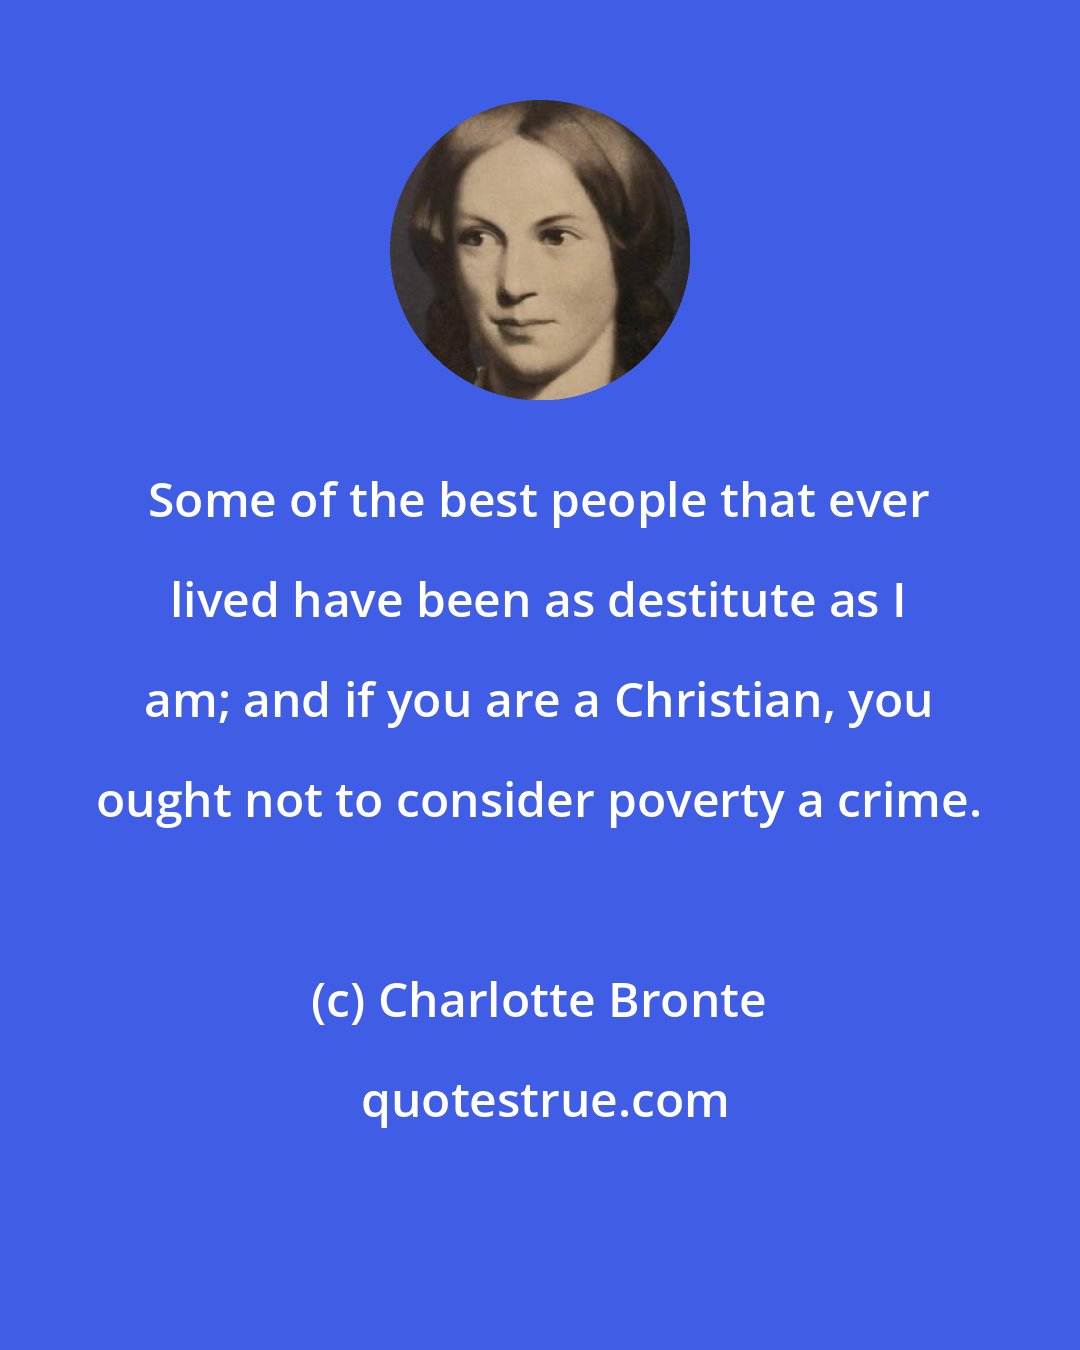 Charlotte Bronte: Some of the best people that ever lived have been as destitute as I am; and if you are a Christian, you ought not to consider poverty a crime.